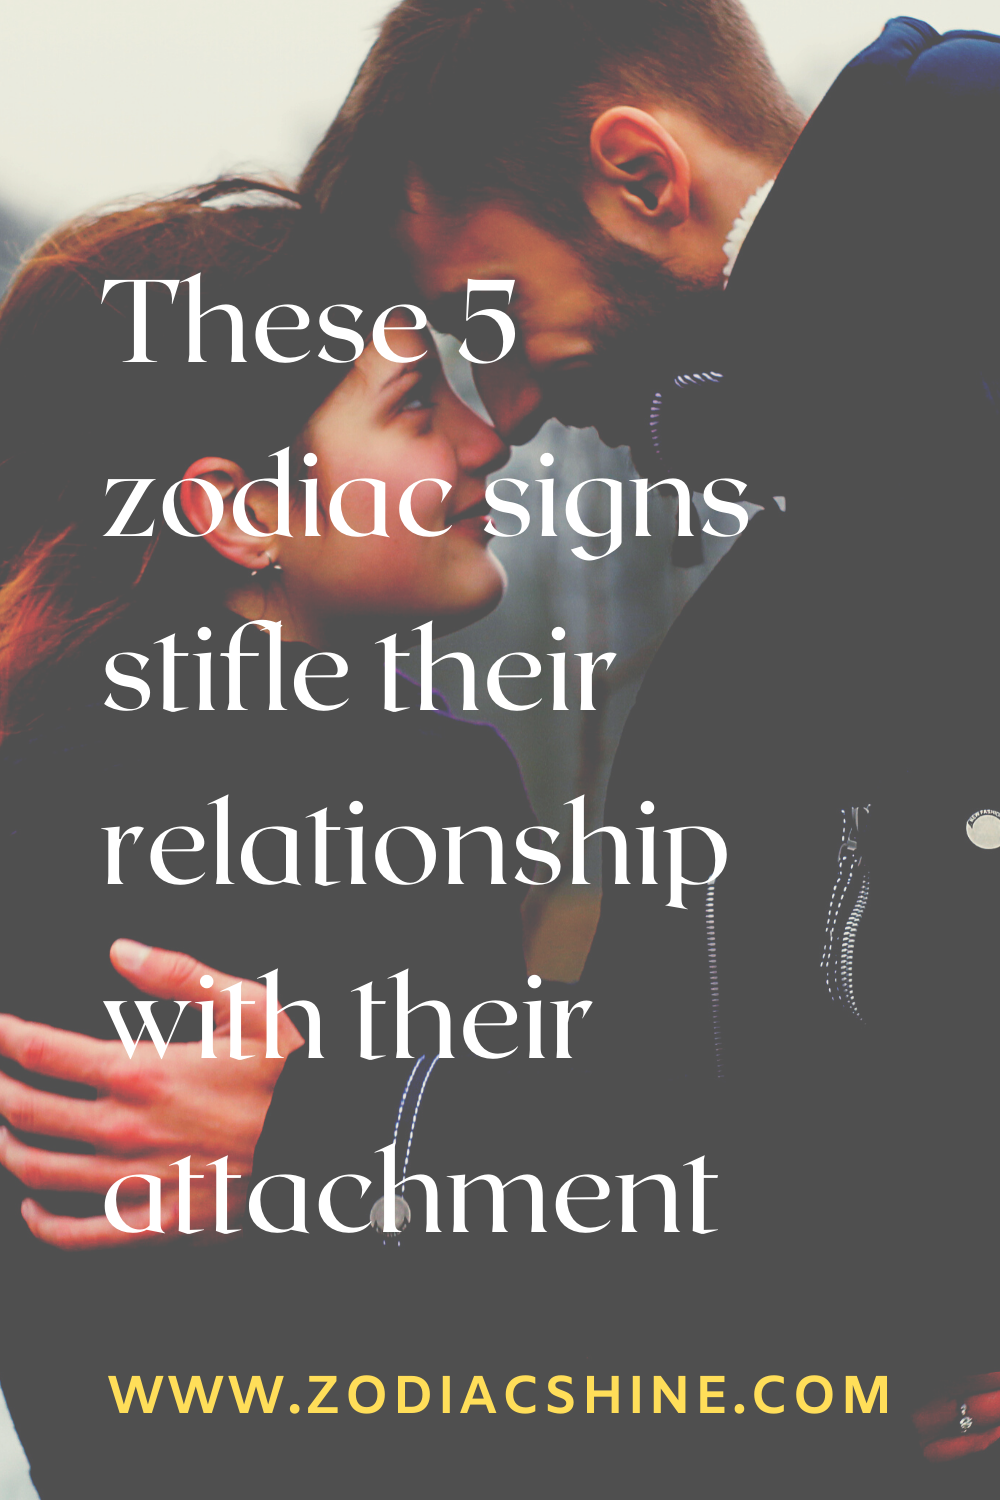 These 5 zodiac signs stifle their relationship with their attachment